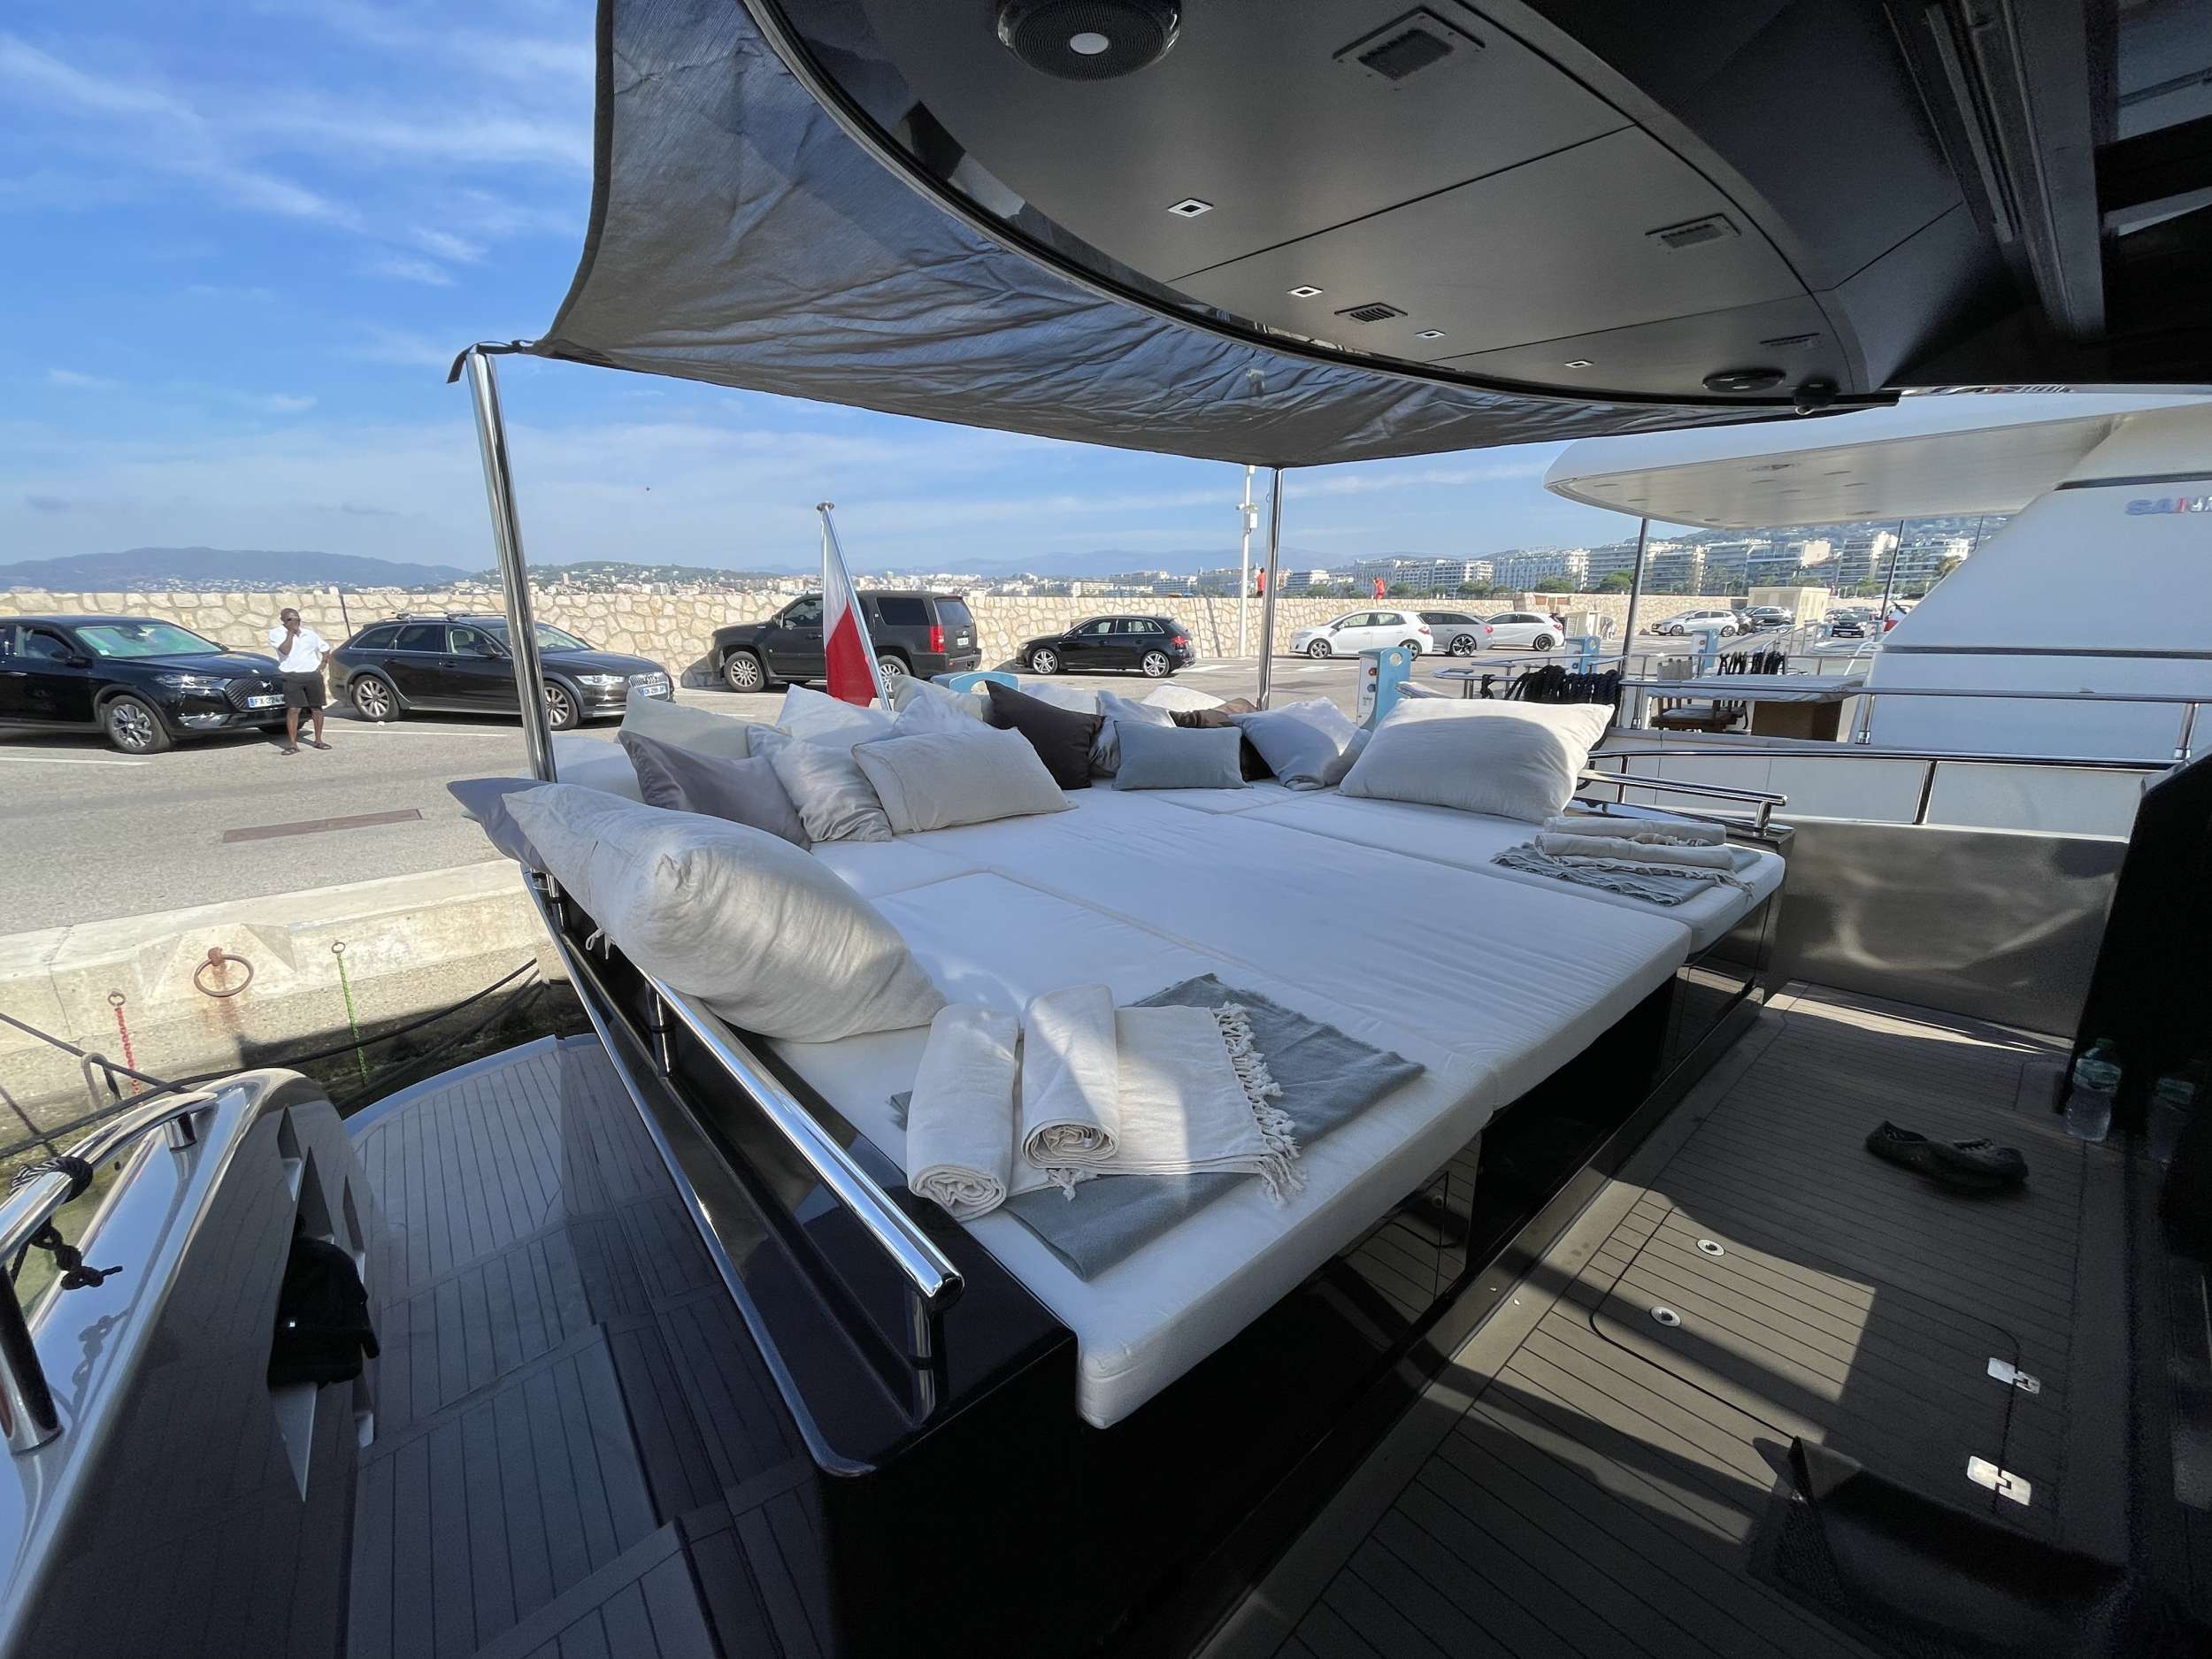 TOMMY I - Yacht Charter Antibes & Boat hire in Fr. Riviera, Corsica & Sardinia 4